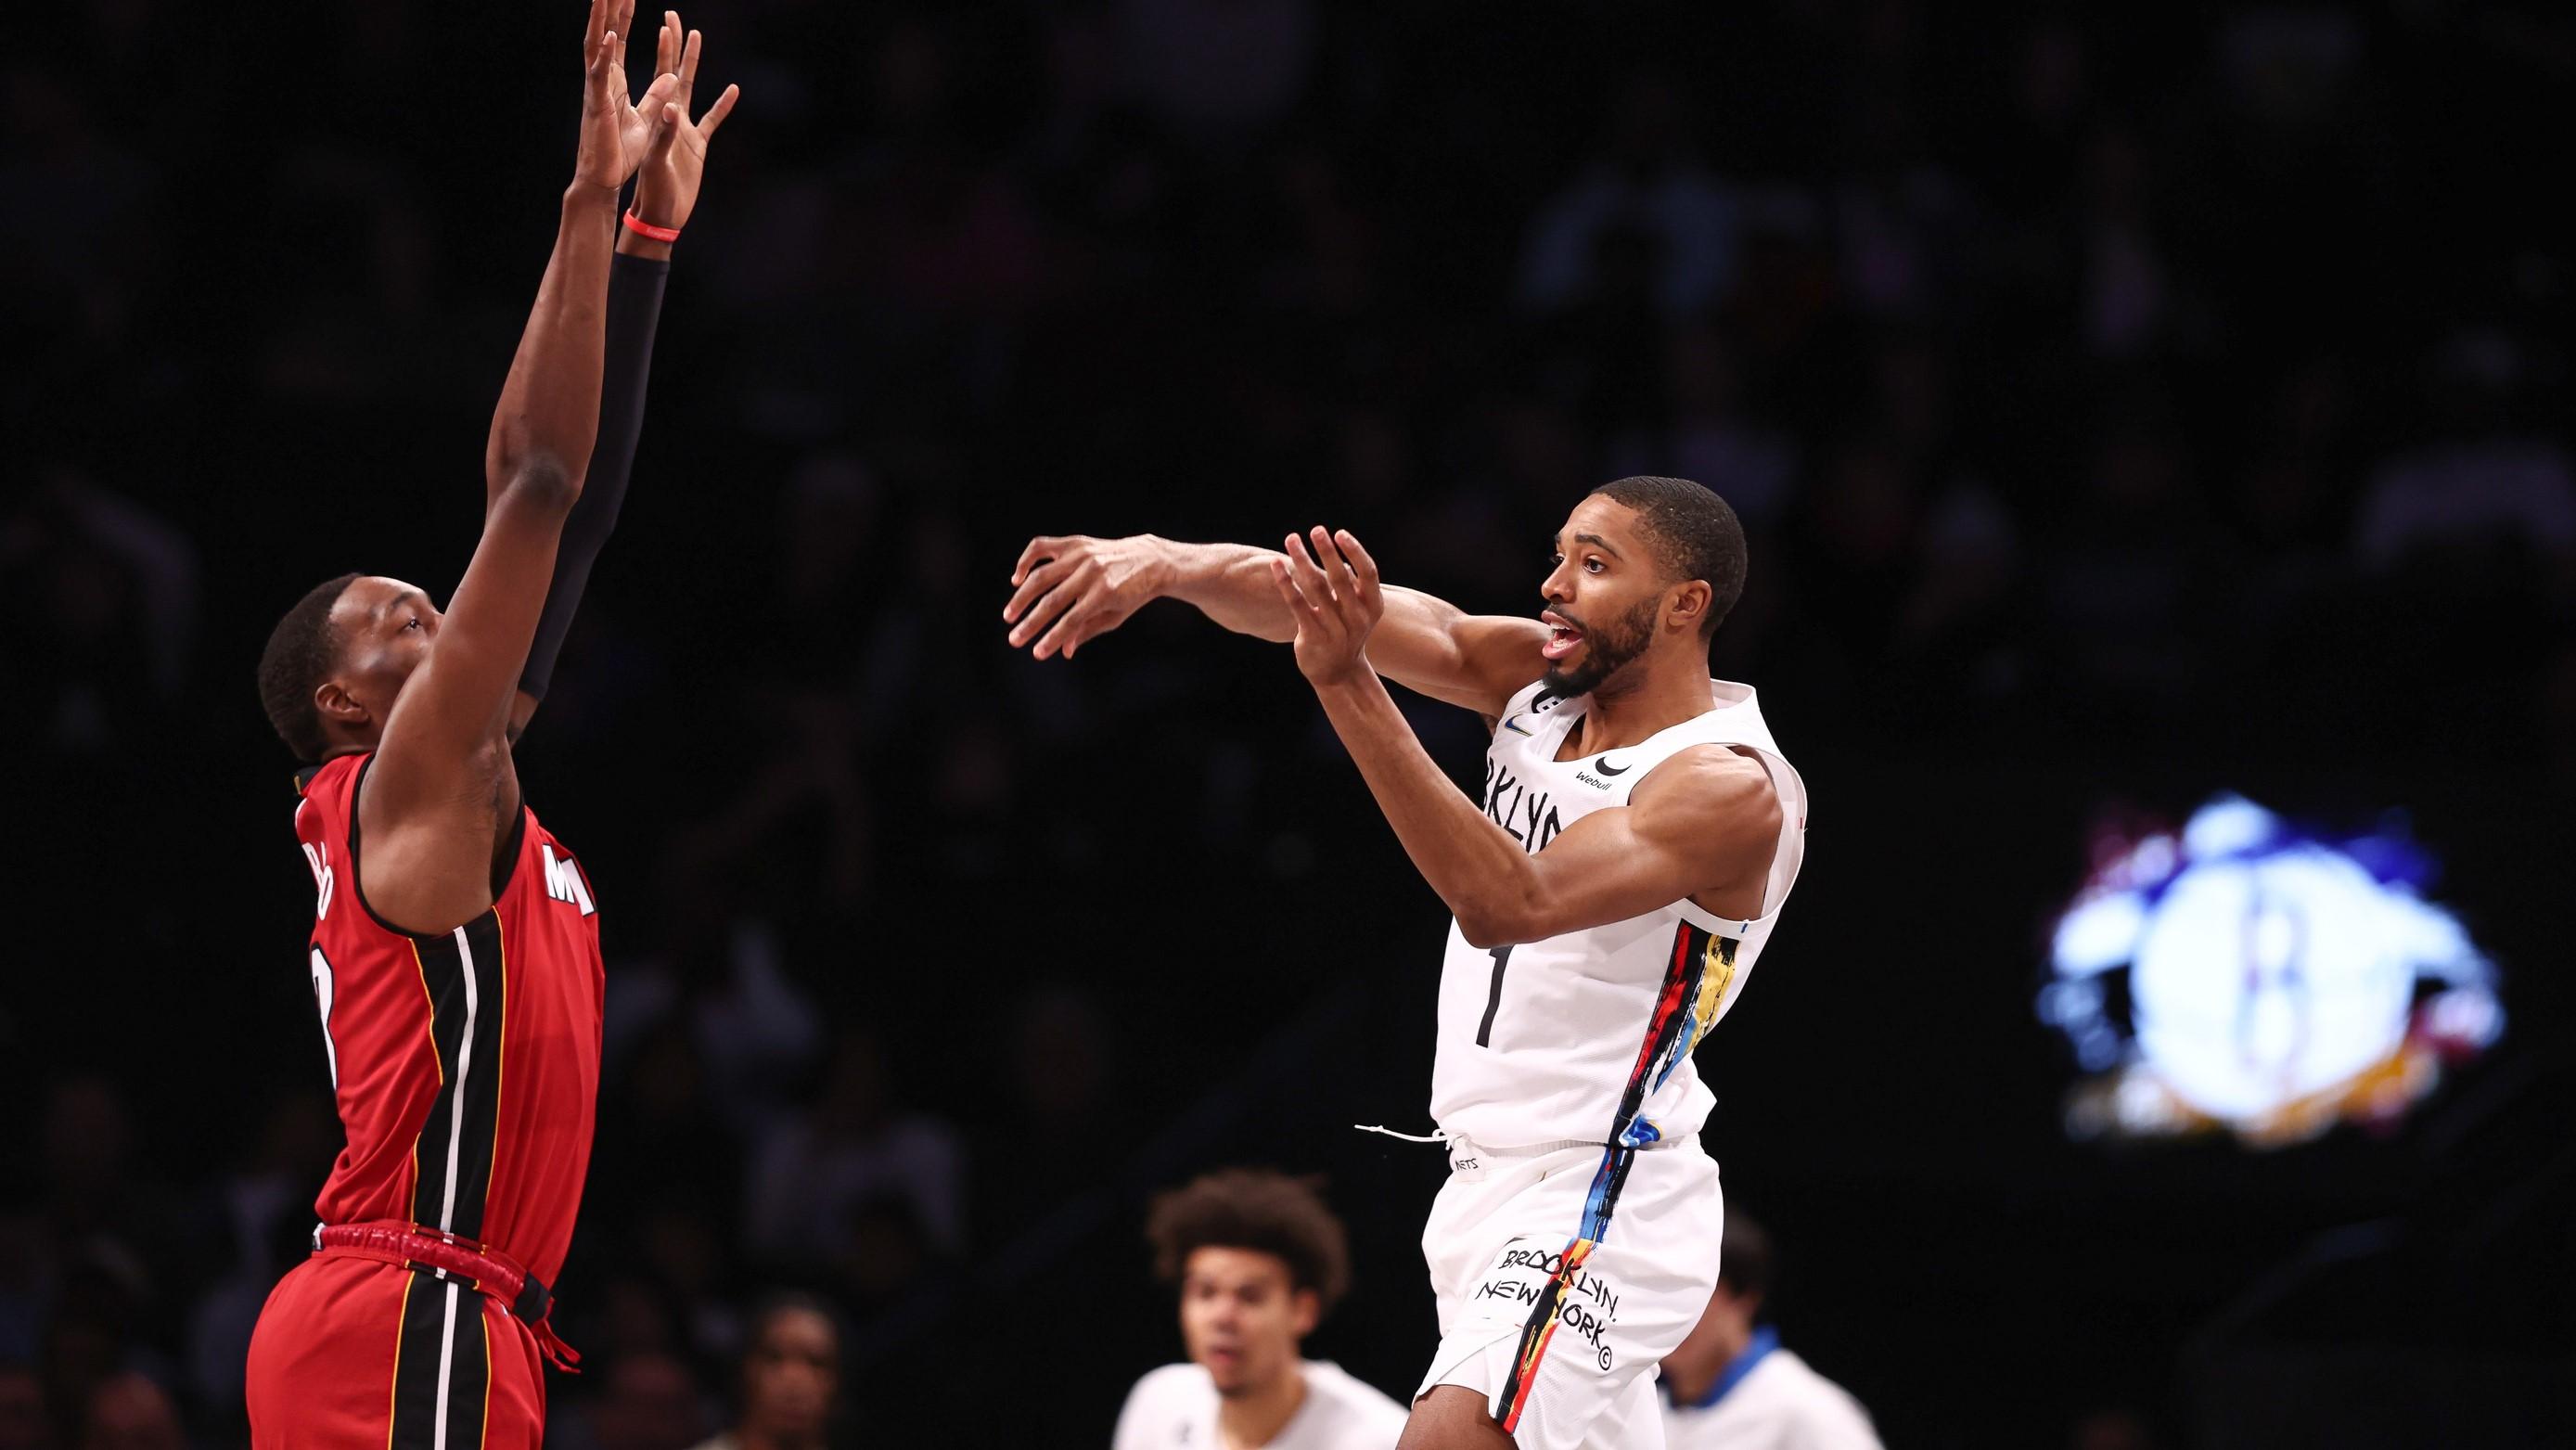 Feb 15, 2023; Brooklyn, New York, USA; Brooklyn Nets forward Mikal Bridges (1) passes the ball as Miami Heat center Bam Adebayo (13) defends during the first quarter at Barclays Center. / Vincent Carchietta-USA TODAY Sports